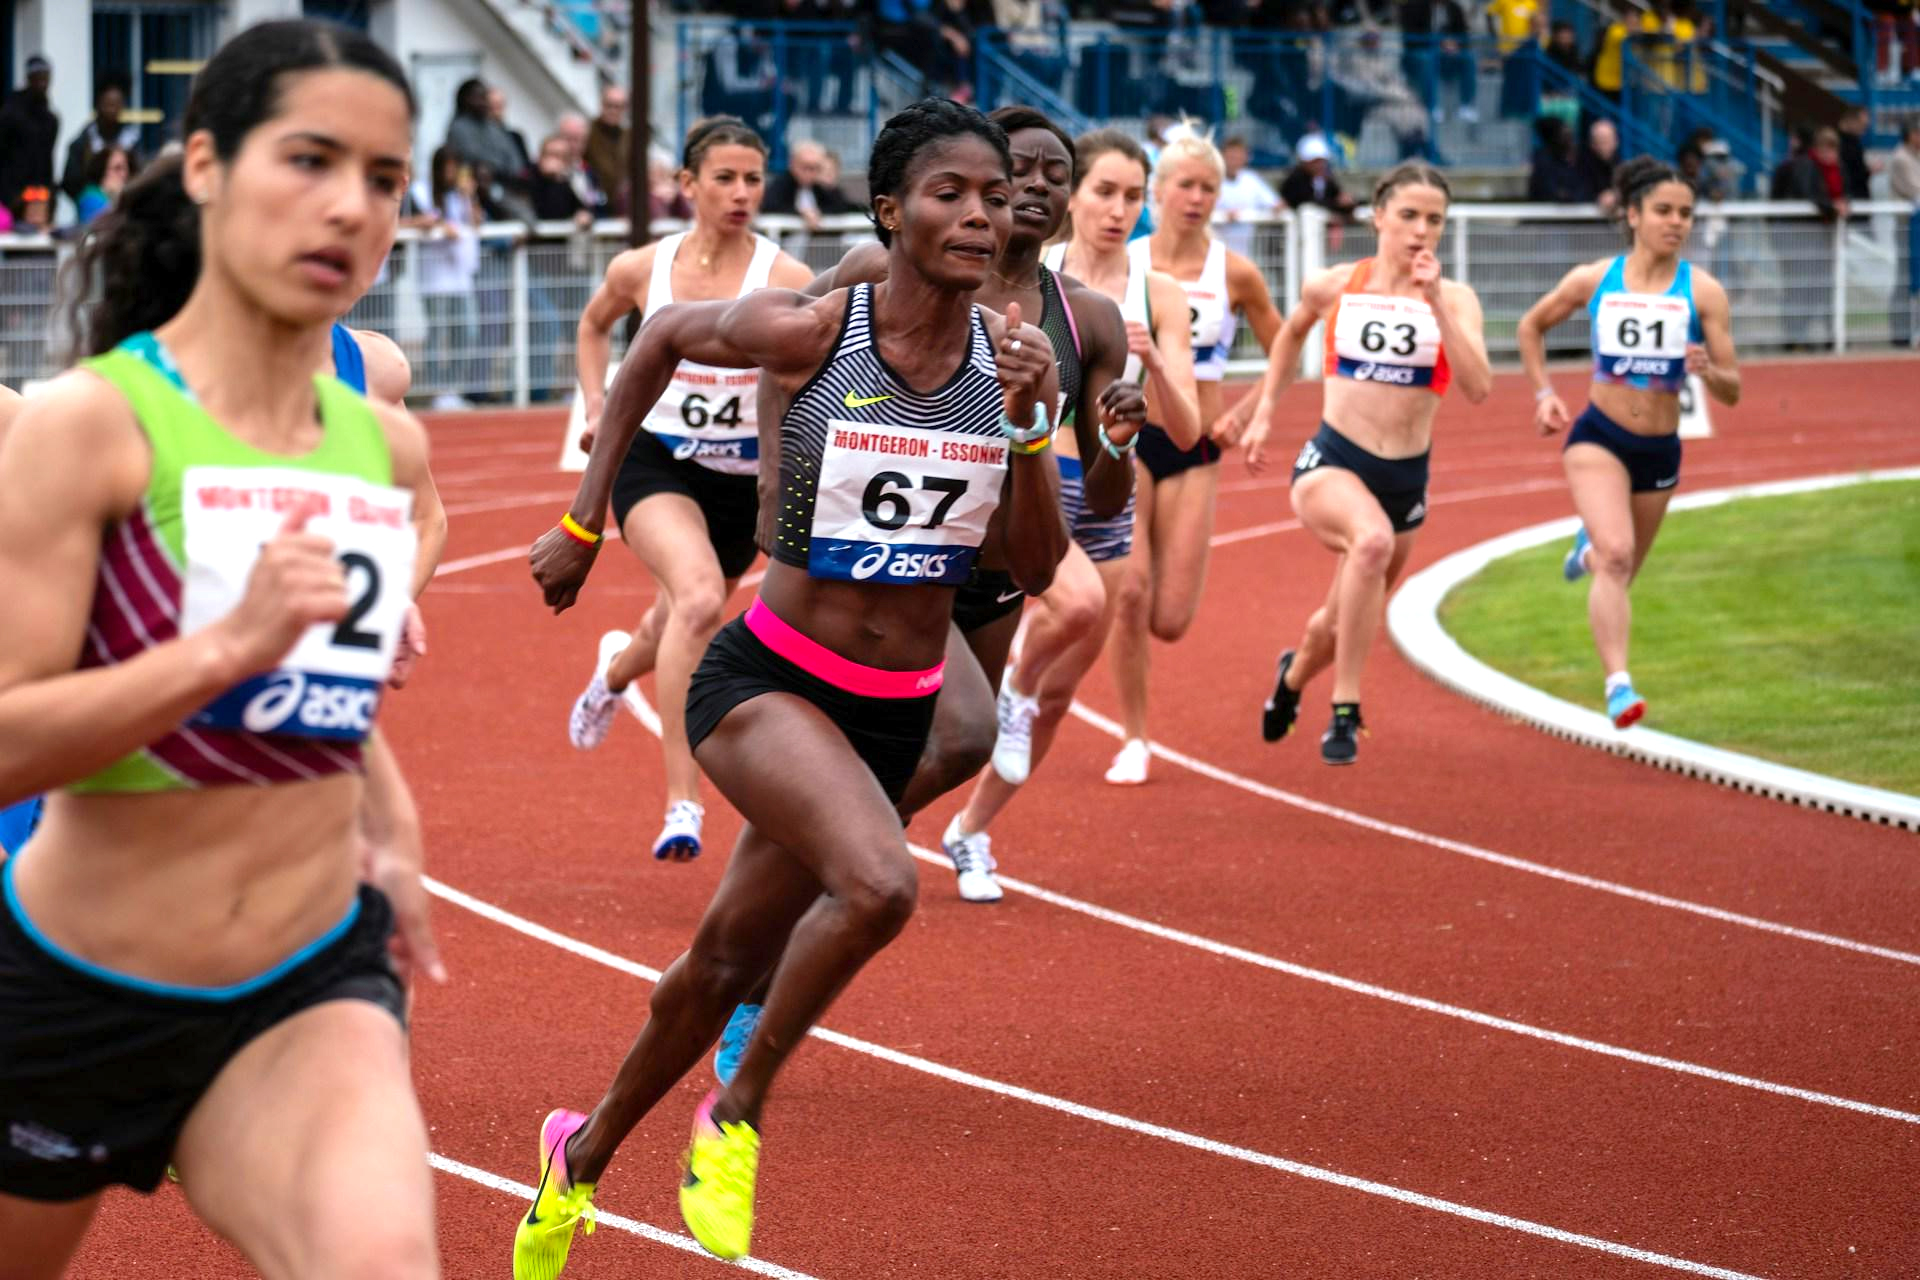 Female athletes running in a track race